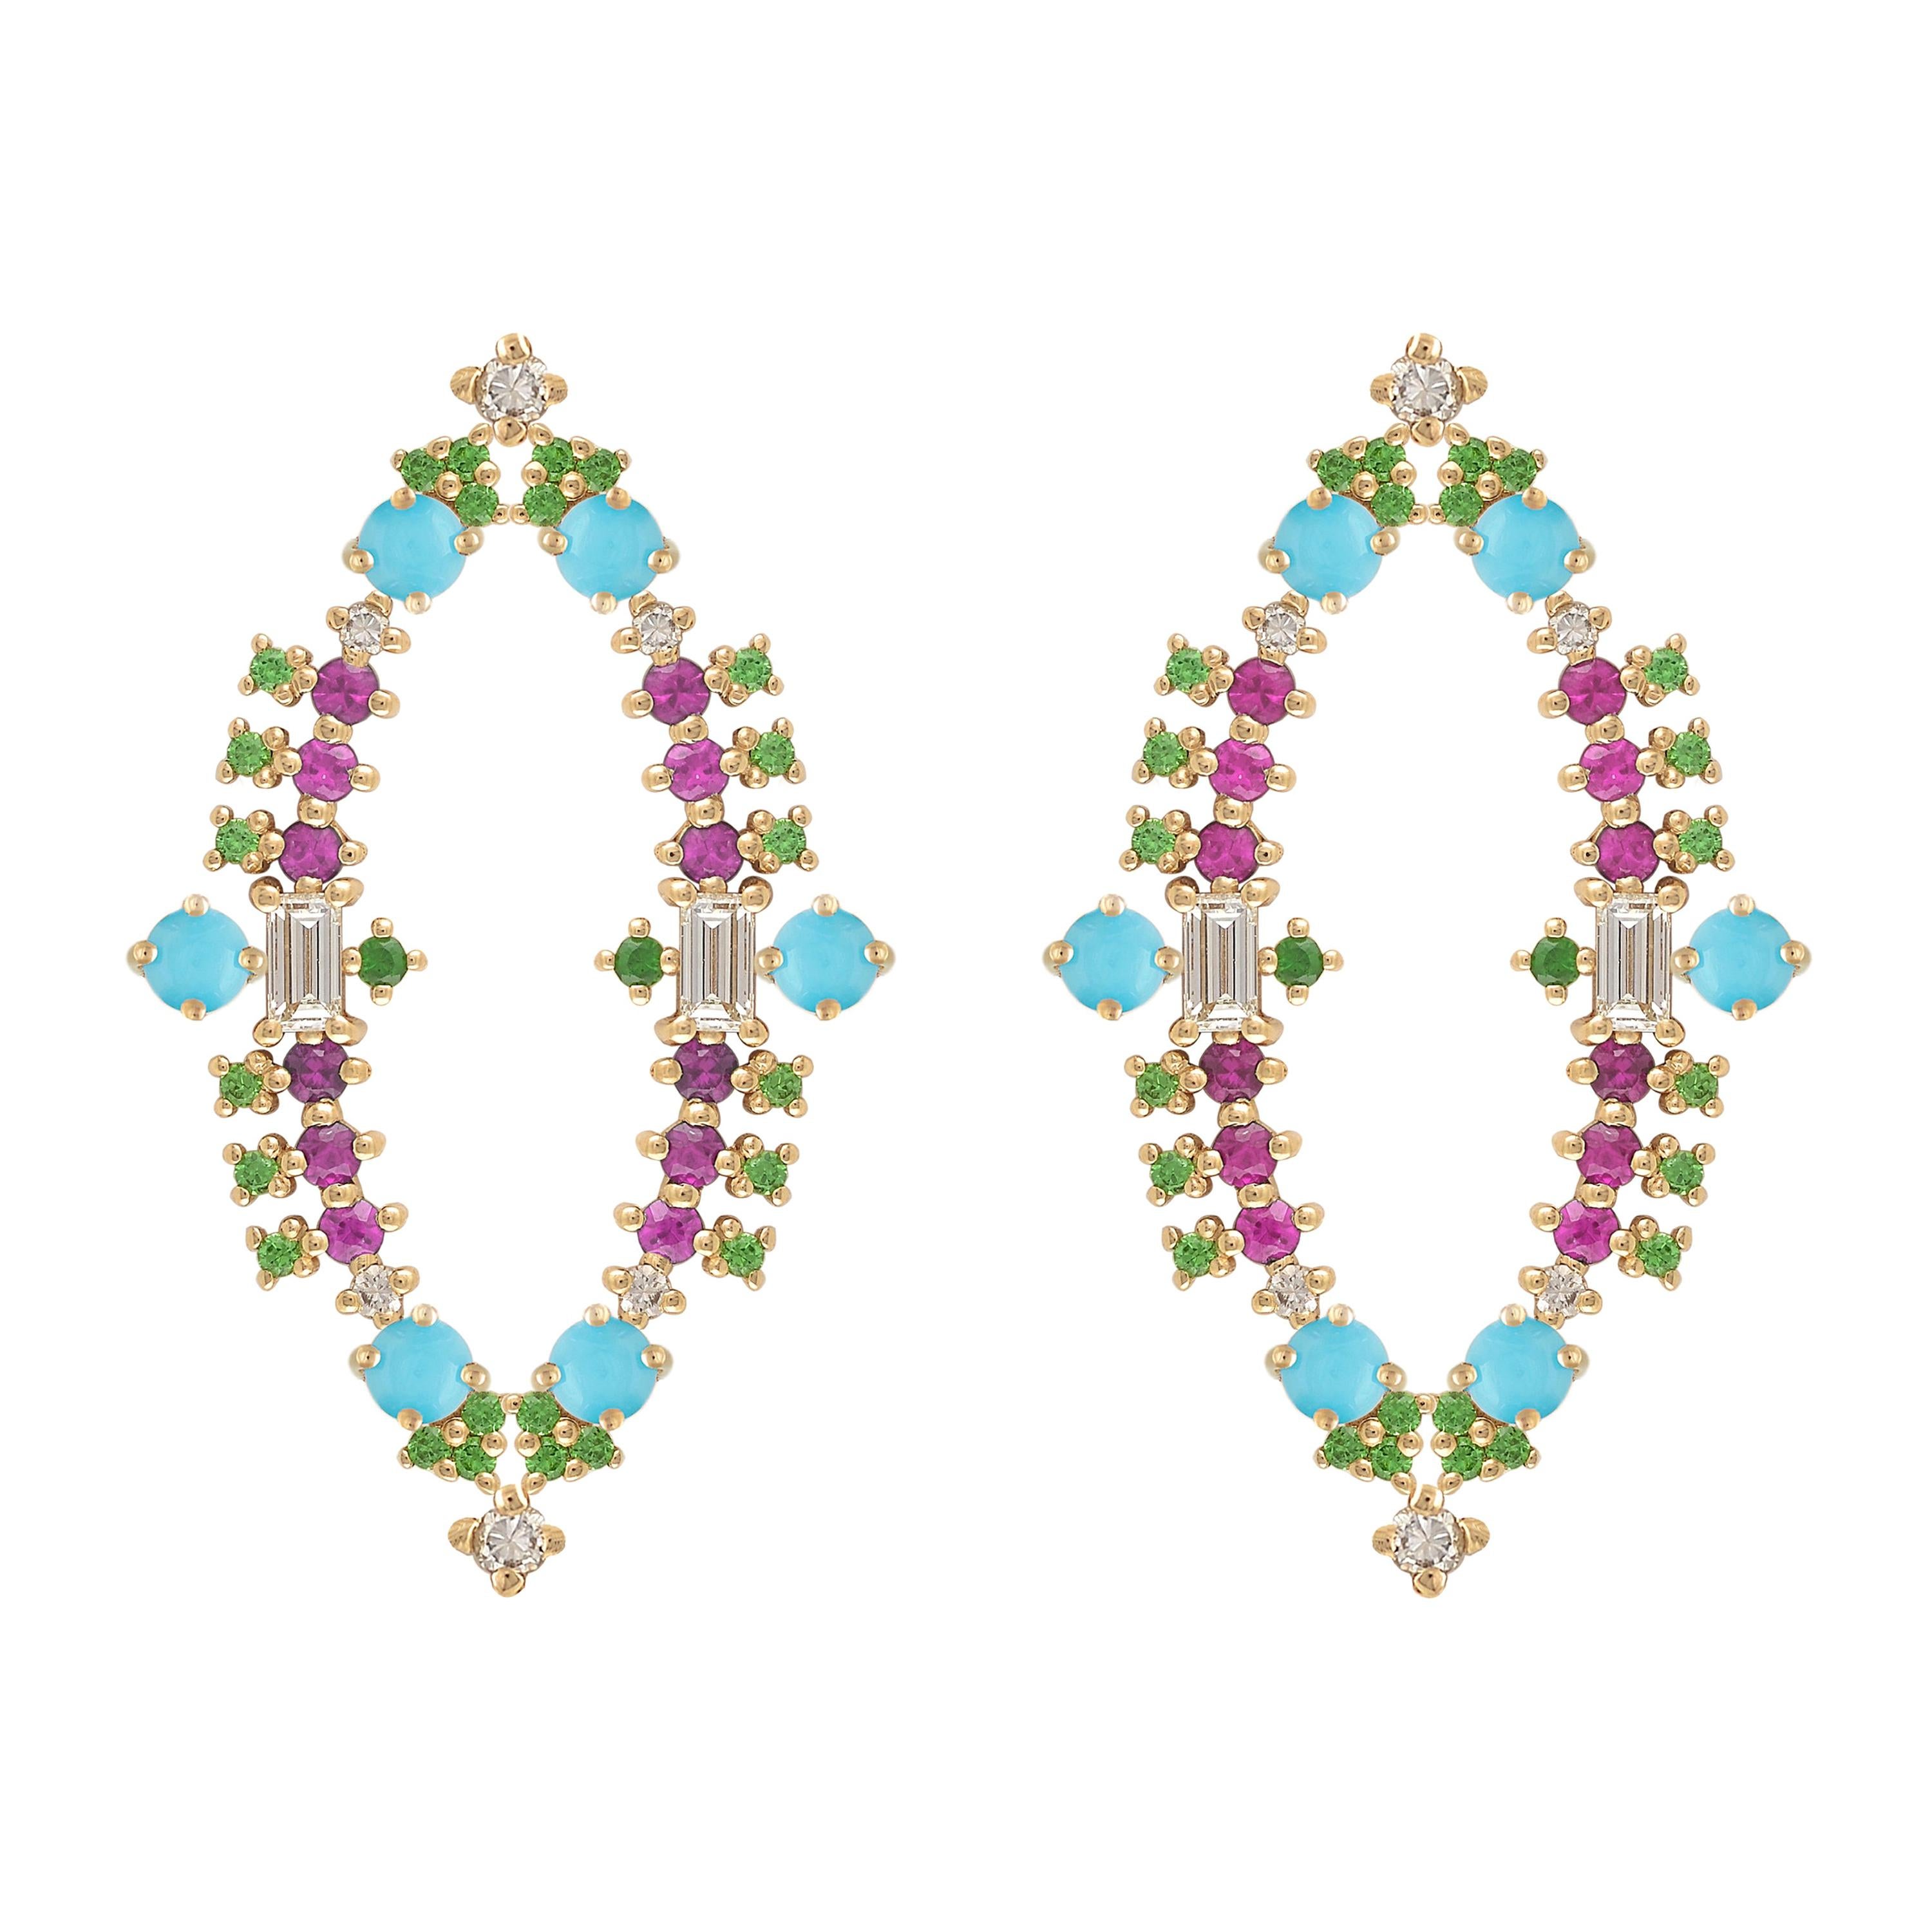 Colorful Earrings in 18k Gold with Pink Sapphires, Turquoise, Tsavorite, Diamond